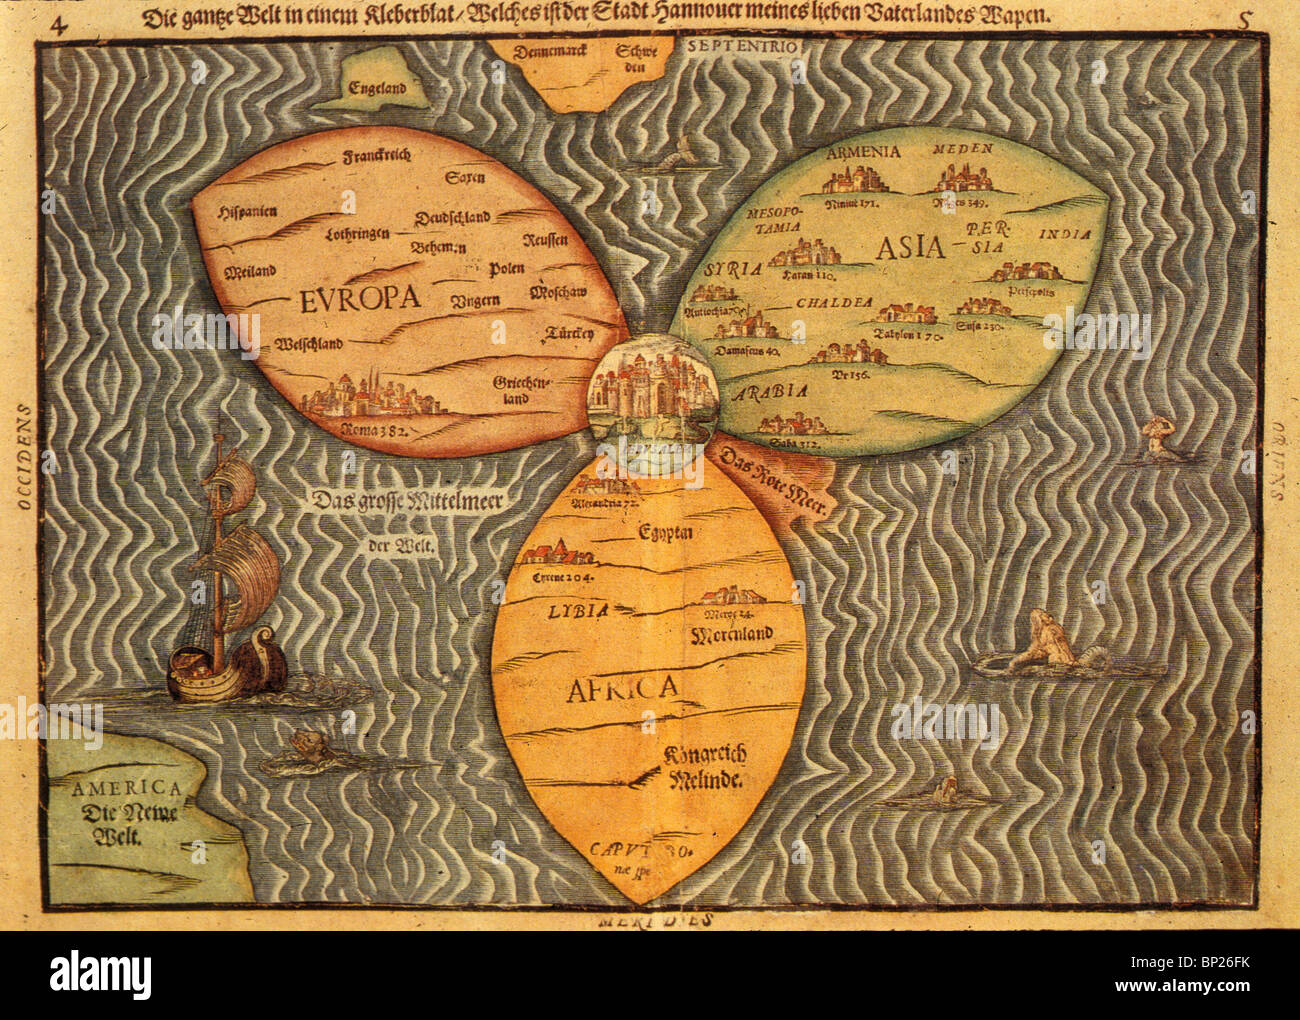 1059. MAP OF THE WORLD WITH JERUSALEM IN THE CENTER, H. BUNTING, 'ITINERARIUM SACRAE SCRIPTUARE' 1581 Stock Photo